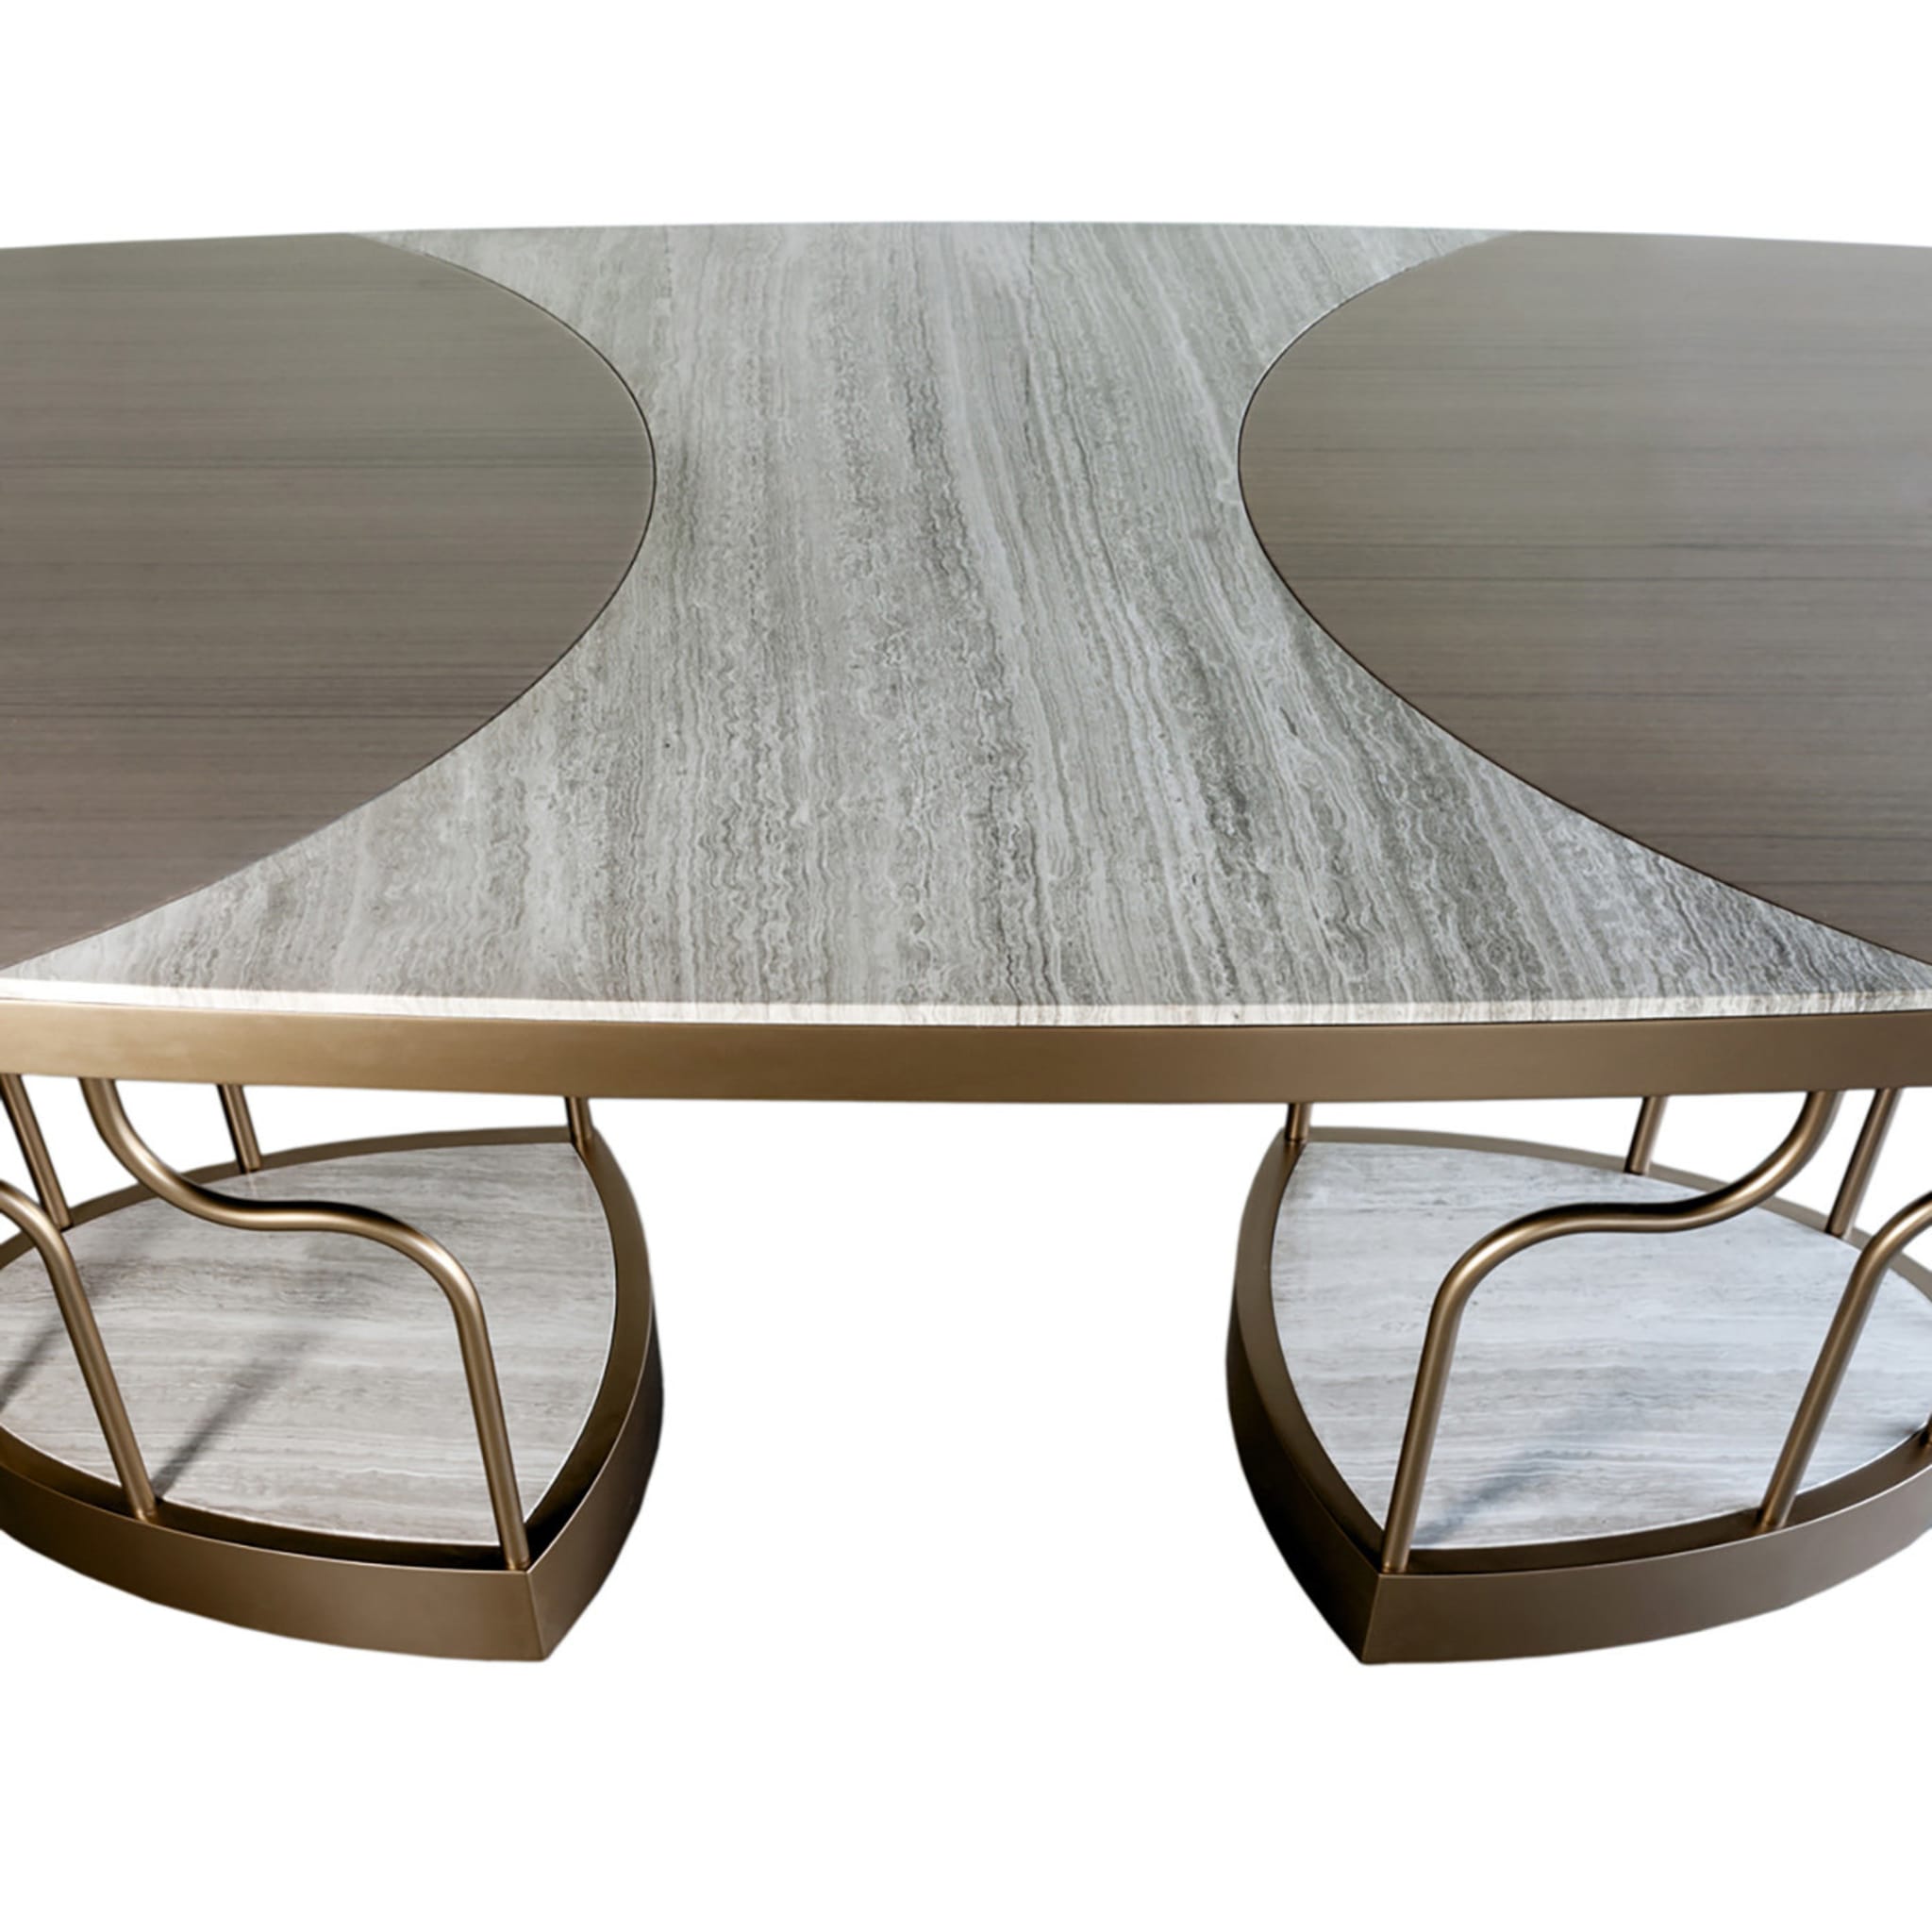 Bloom Oval Dining Table - Alternative view 1